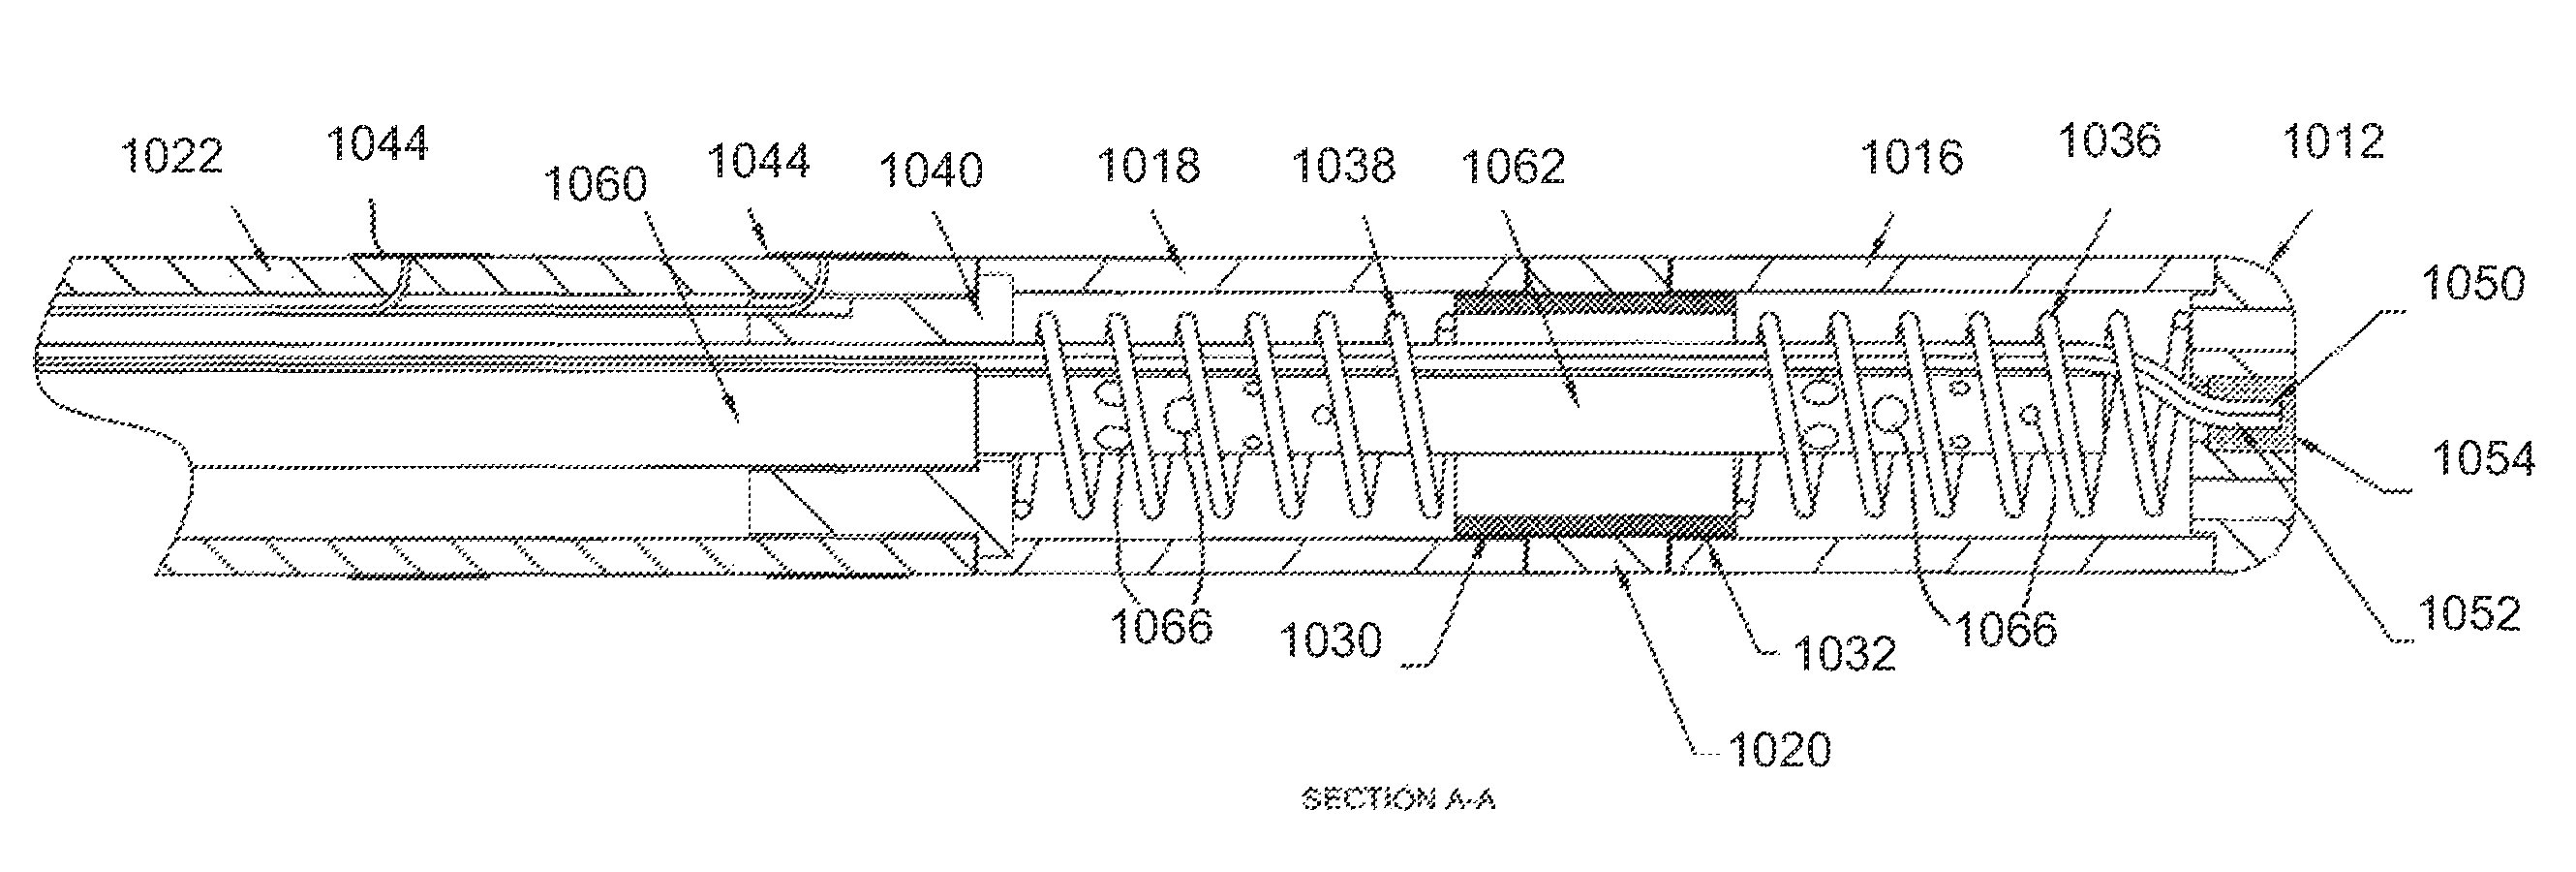 Kit for non-invasive electrophysiology procedures and method of its use